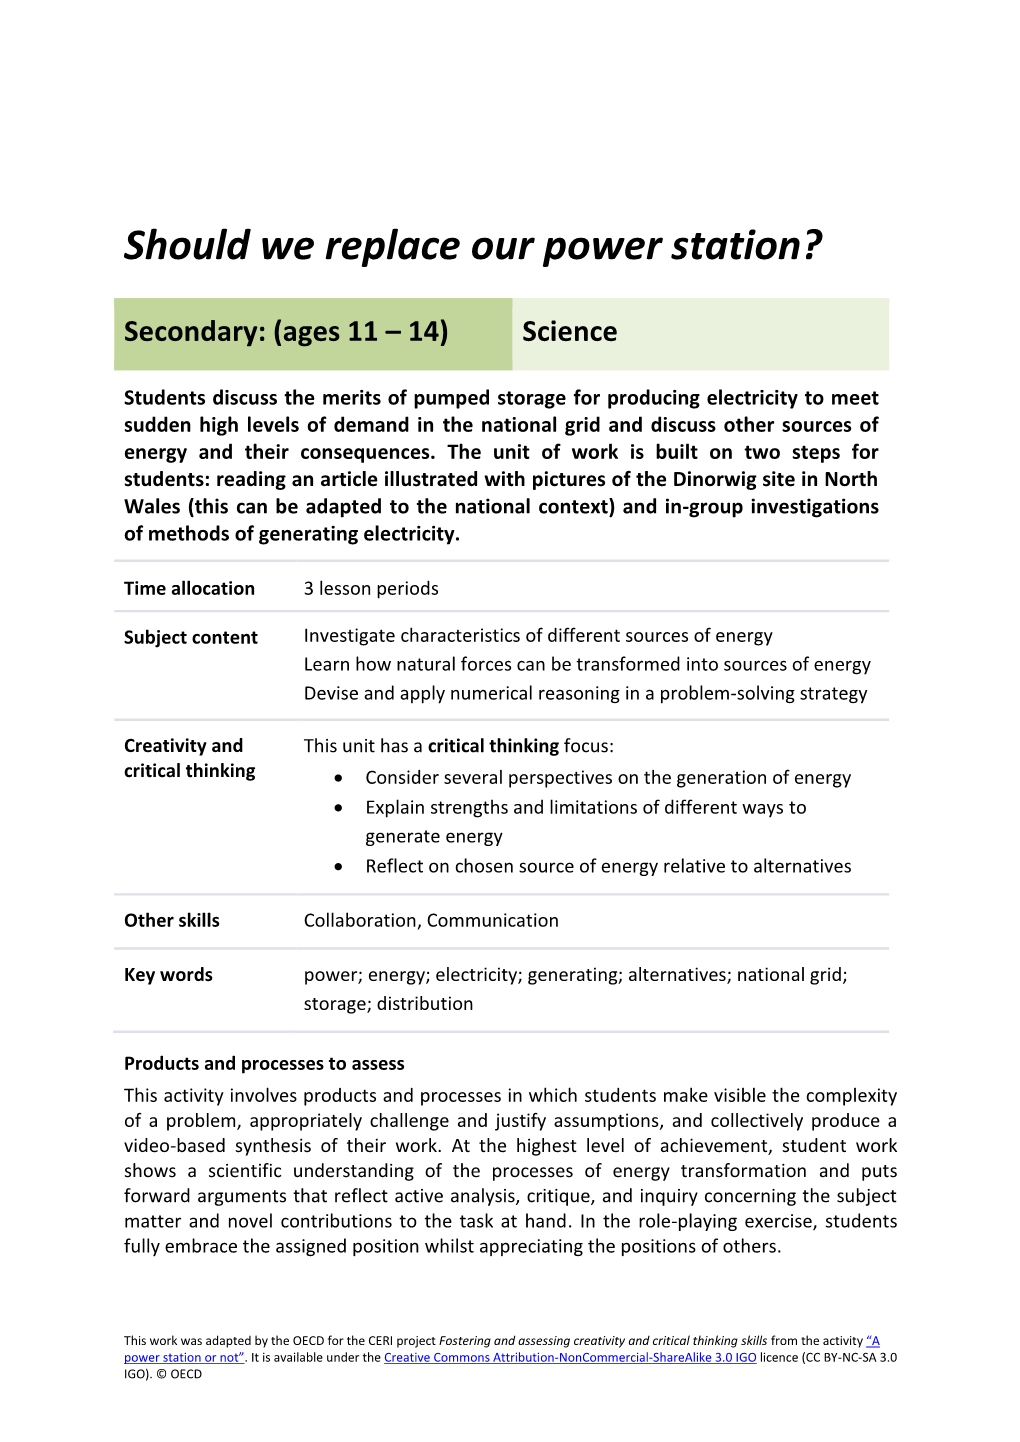 Should We Replace Our Power Station?